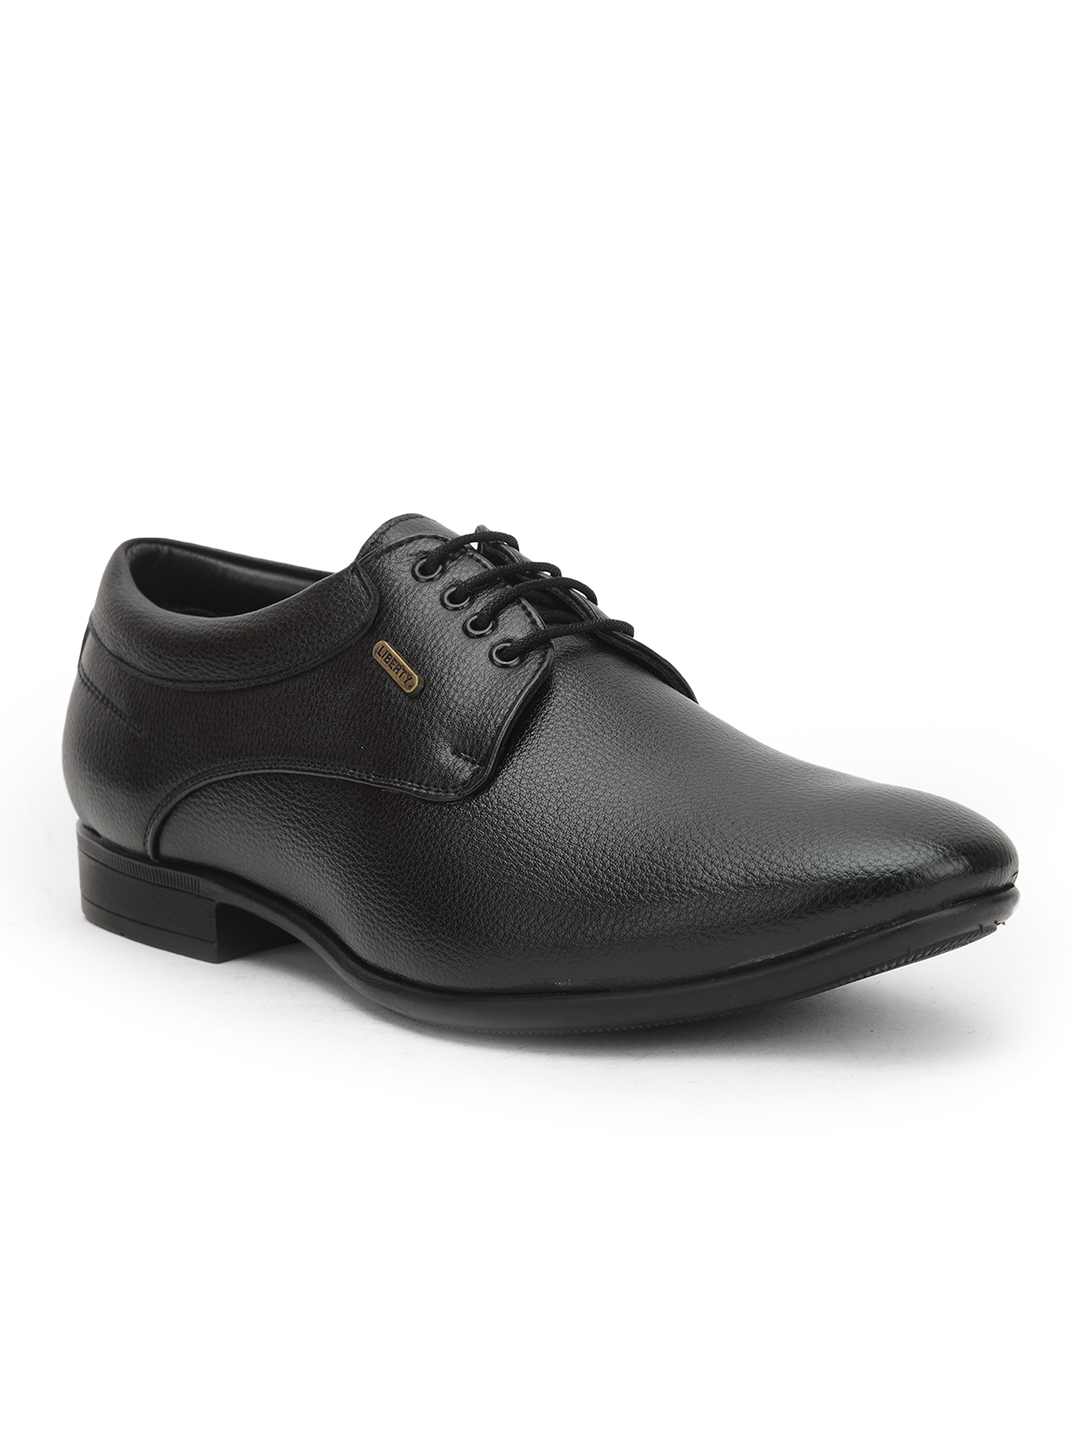 Fortune by Liberty Men Black Formal Shoes